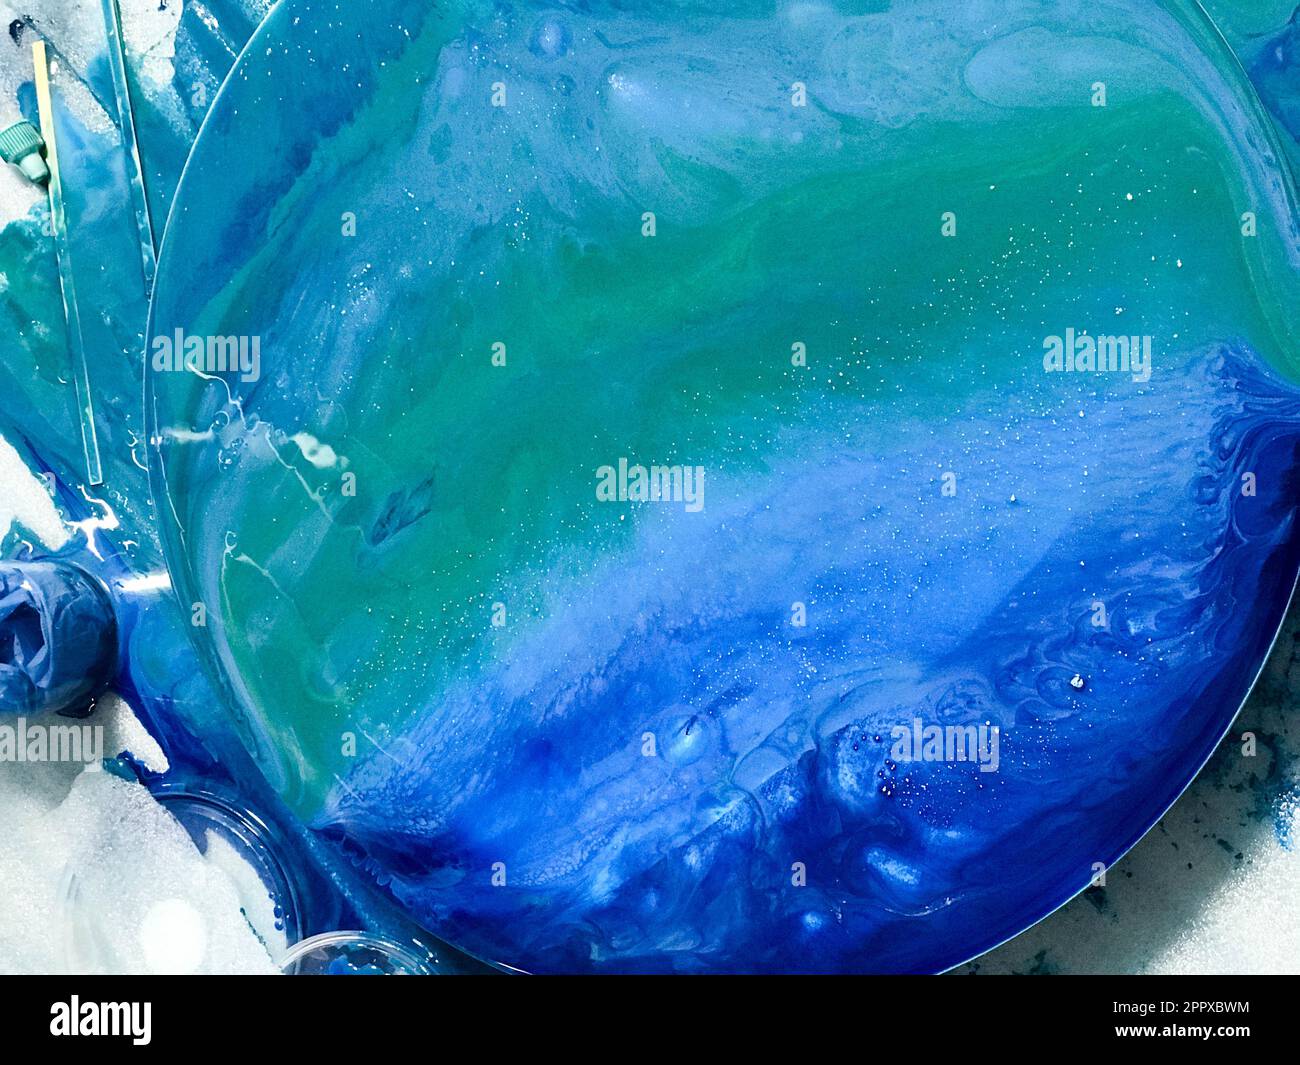 The process of creating a home-made trendy abstract modern pattern painted  with acrylic resin. Woman artist in home studio. Epoxy resin Stock Photo -  Alamy